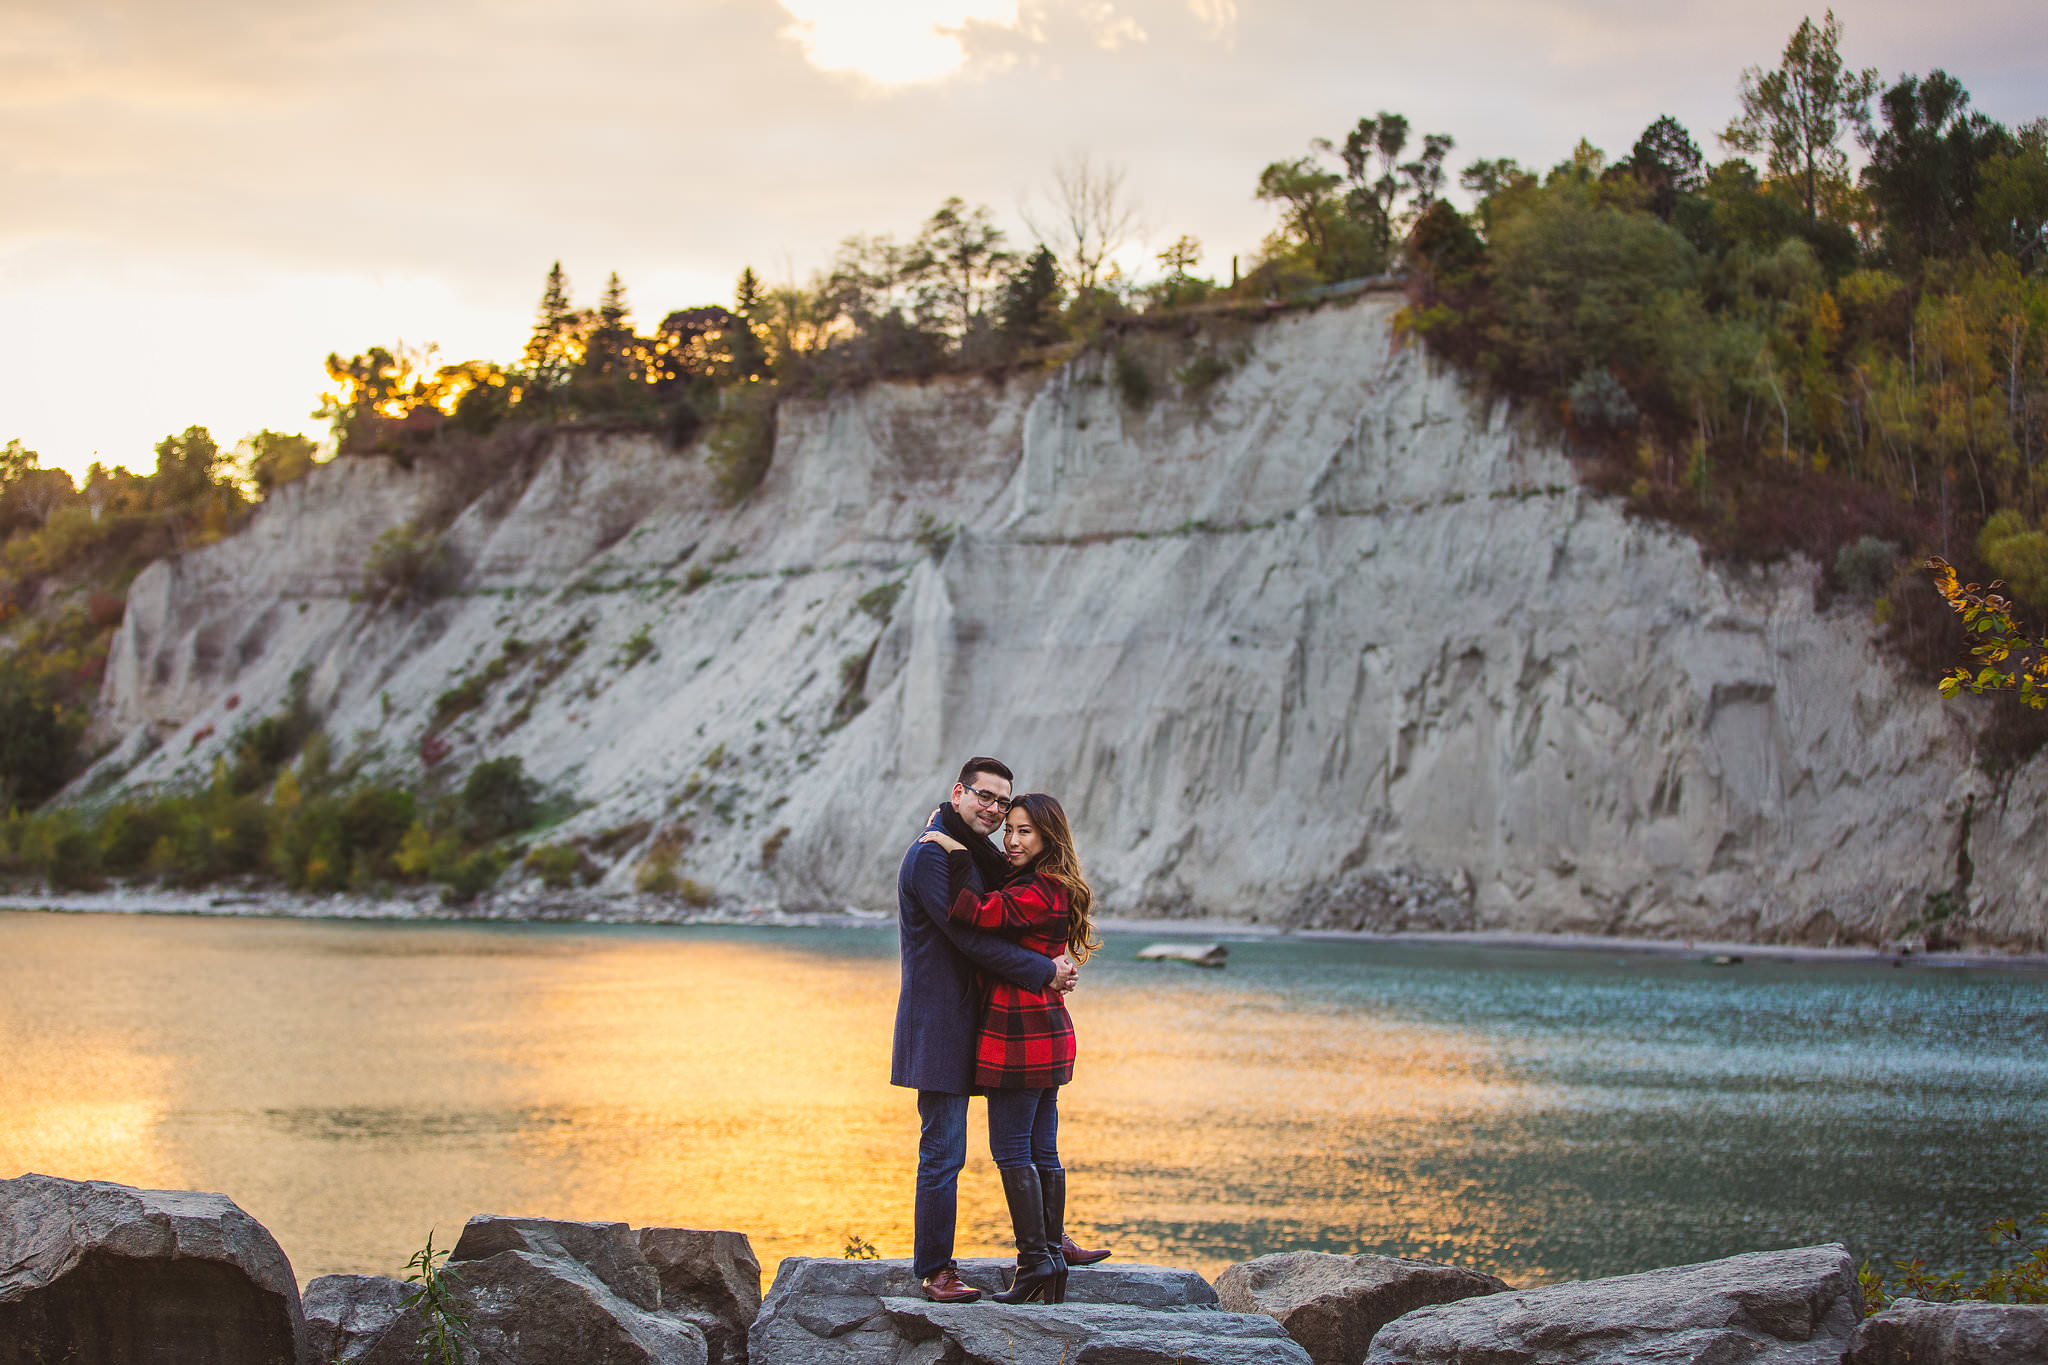 scarborough bluffs engagement photos, fall engagement photos scarborough bluffs, fall engagement photos toronto, engagement photos water toronto